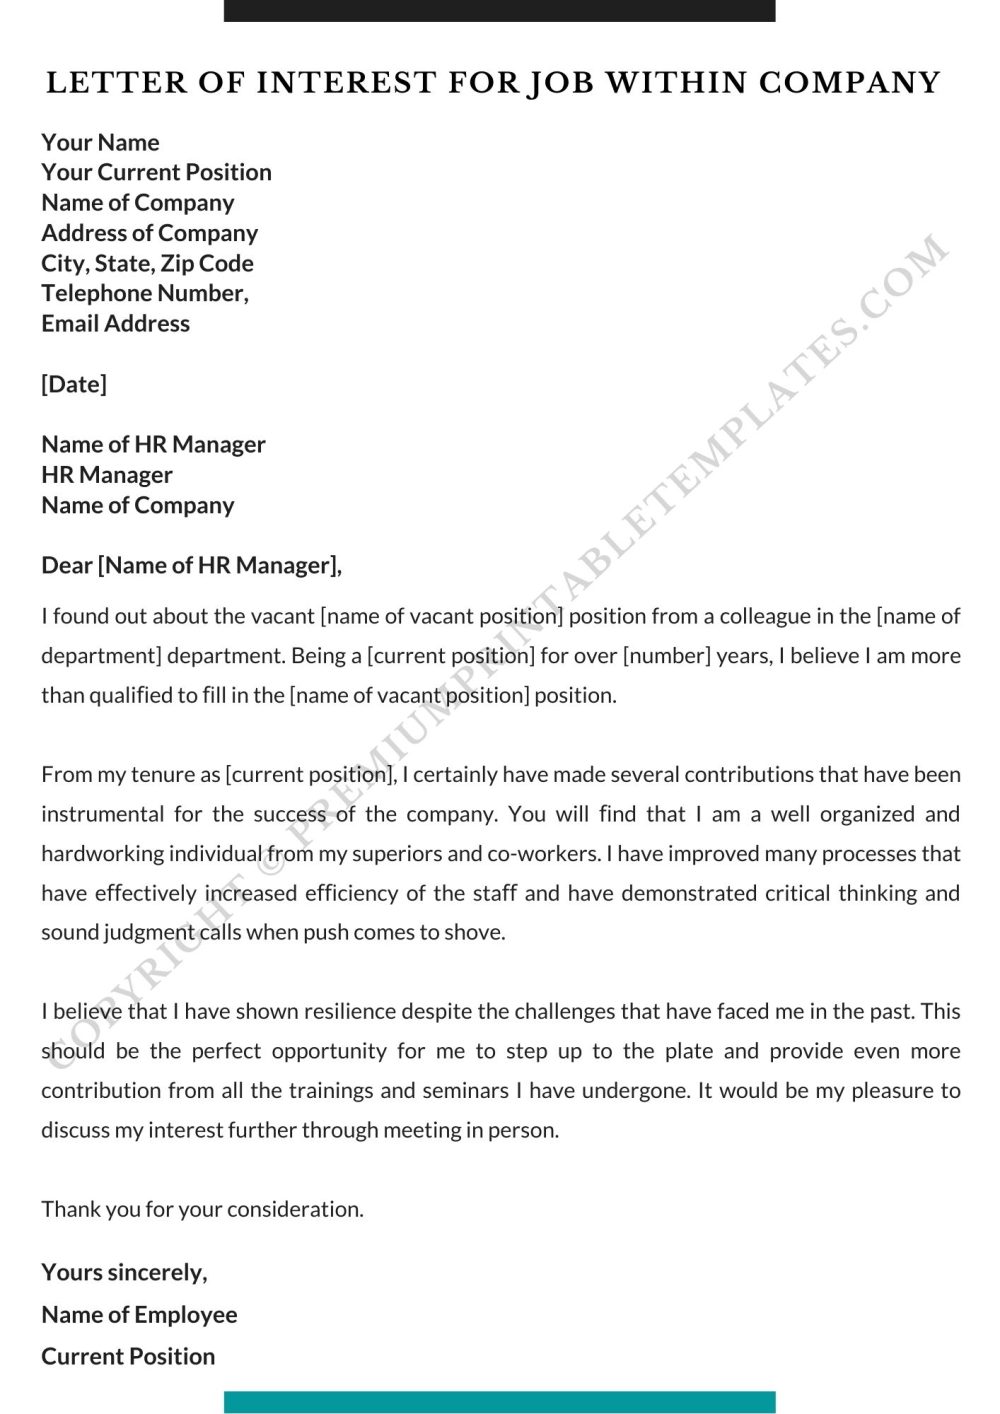 Letter of Interest For Job within company